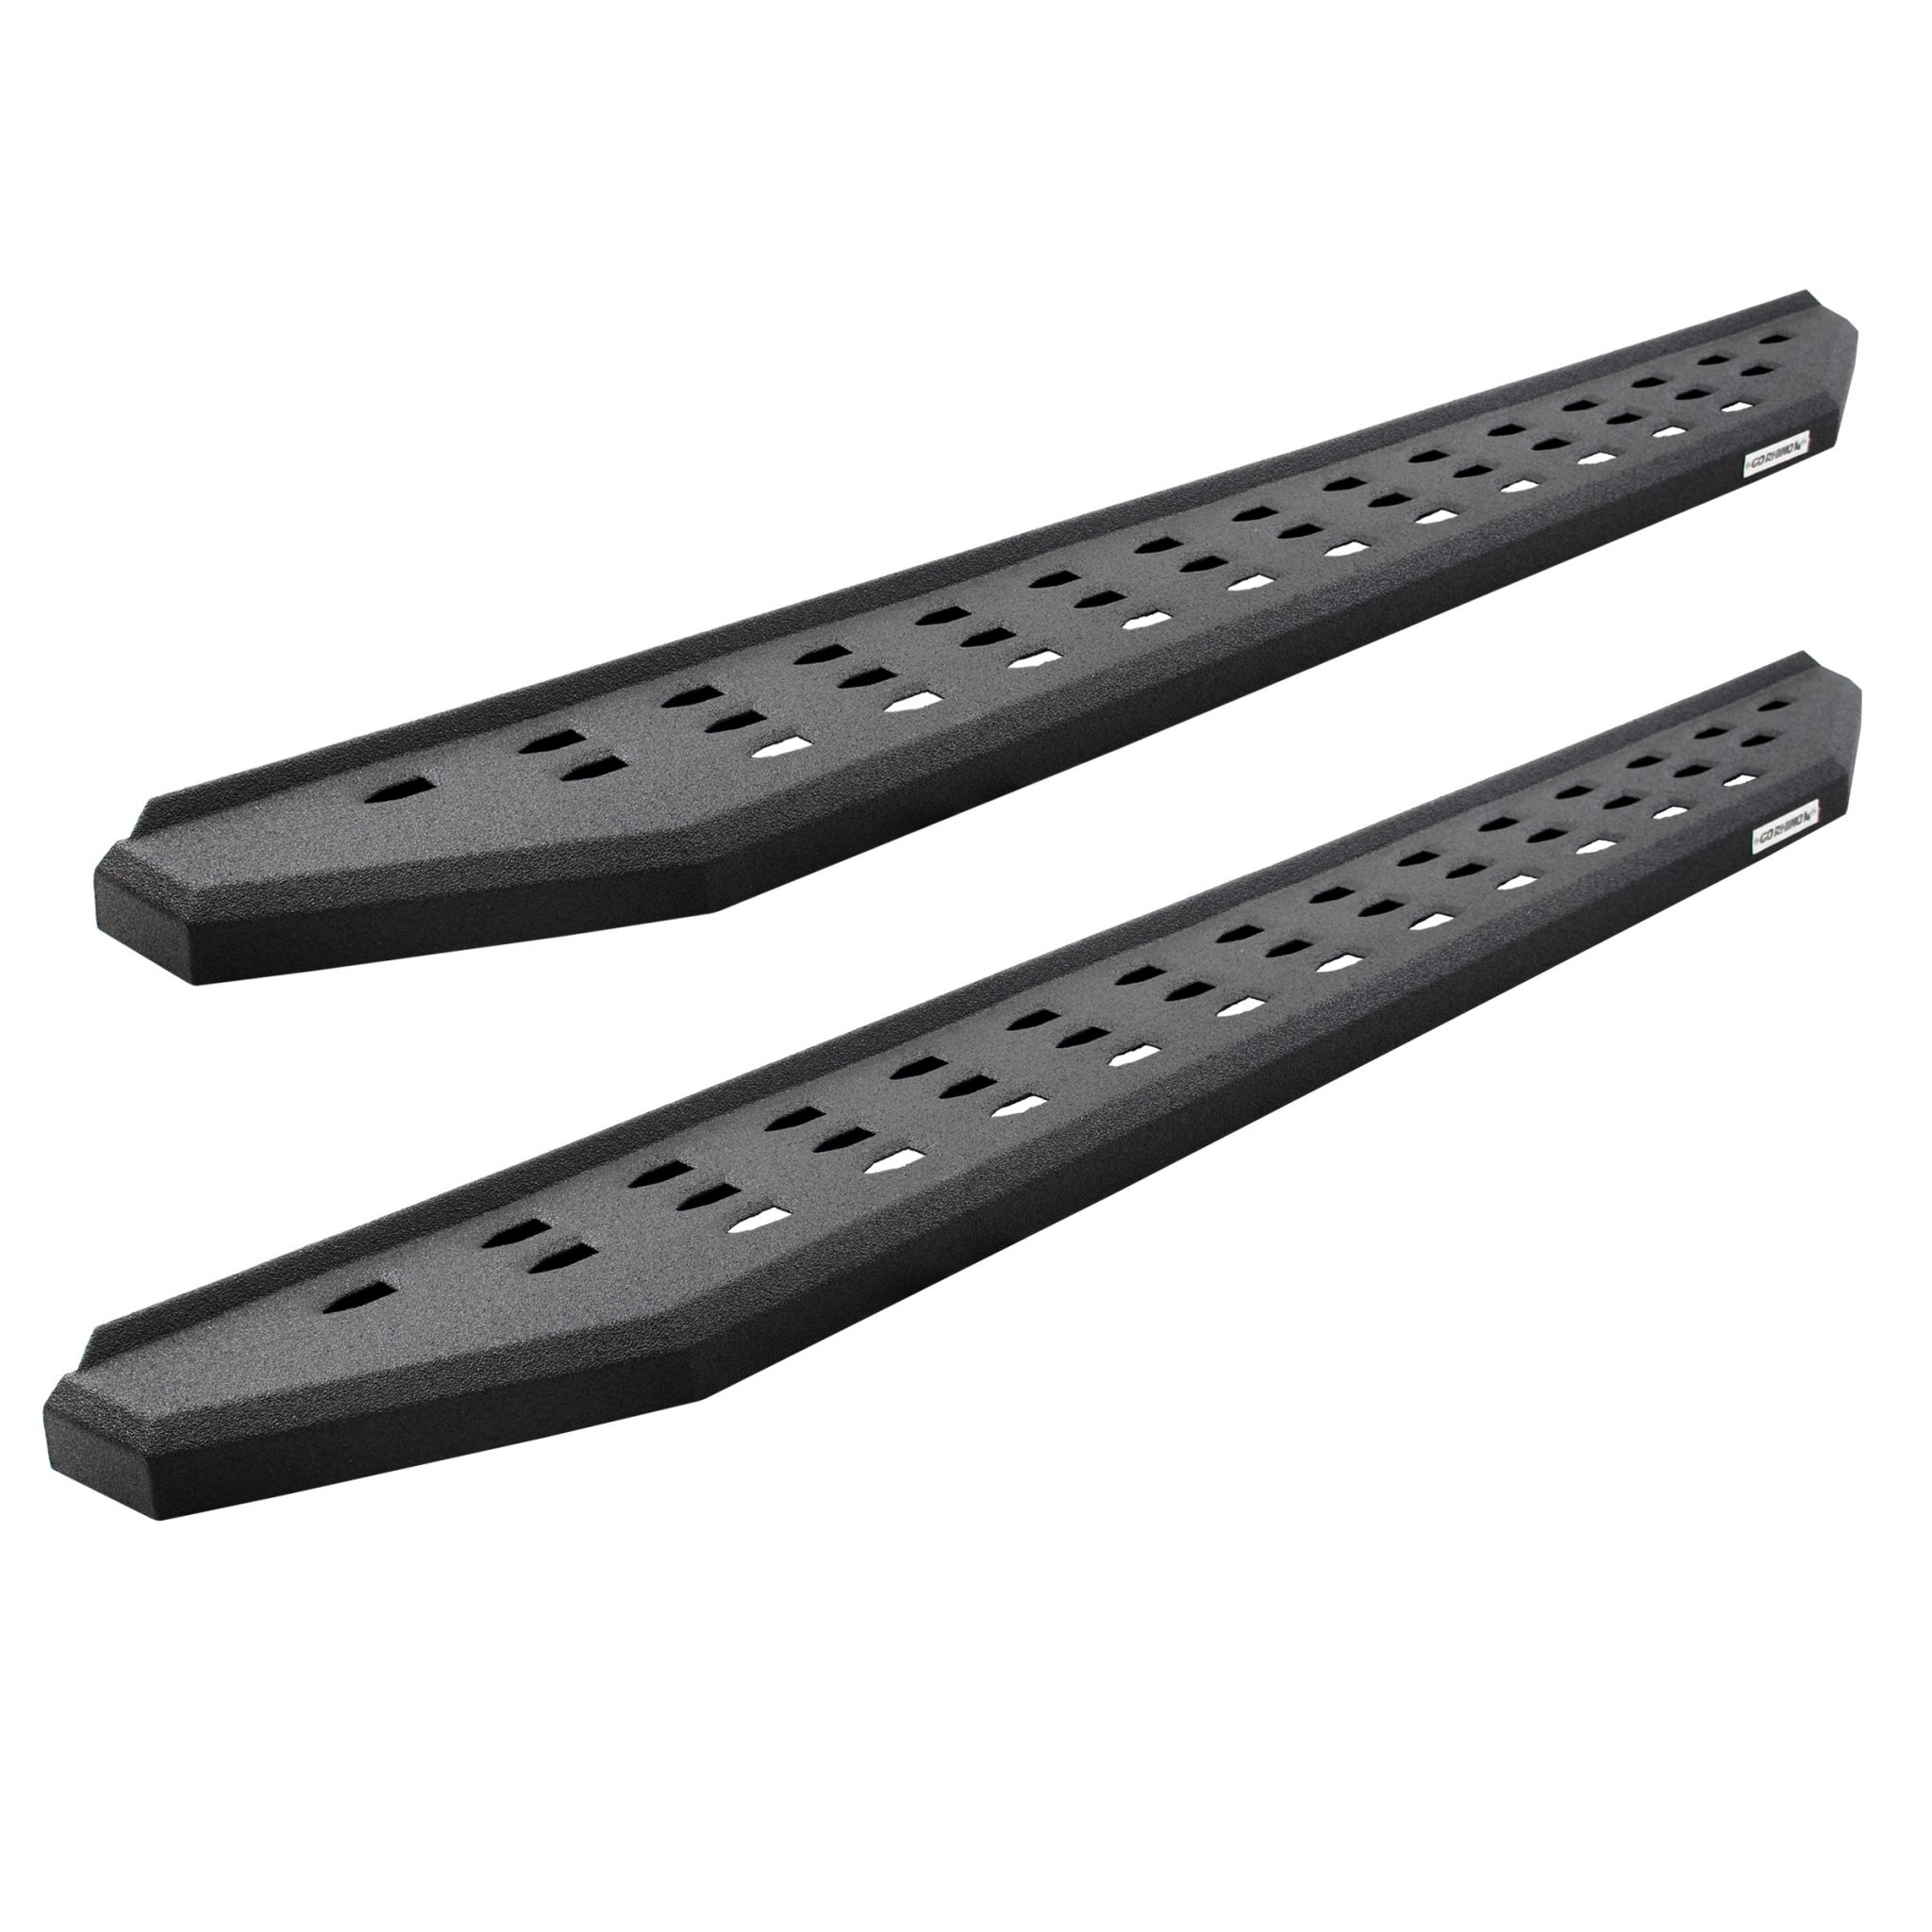 Go Rhino - 6940488020T - RB20 Running Boards With Mounting Brackets & 2 Pairs of Drop Steps Kit - Protective Bedliner Coating